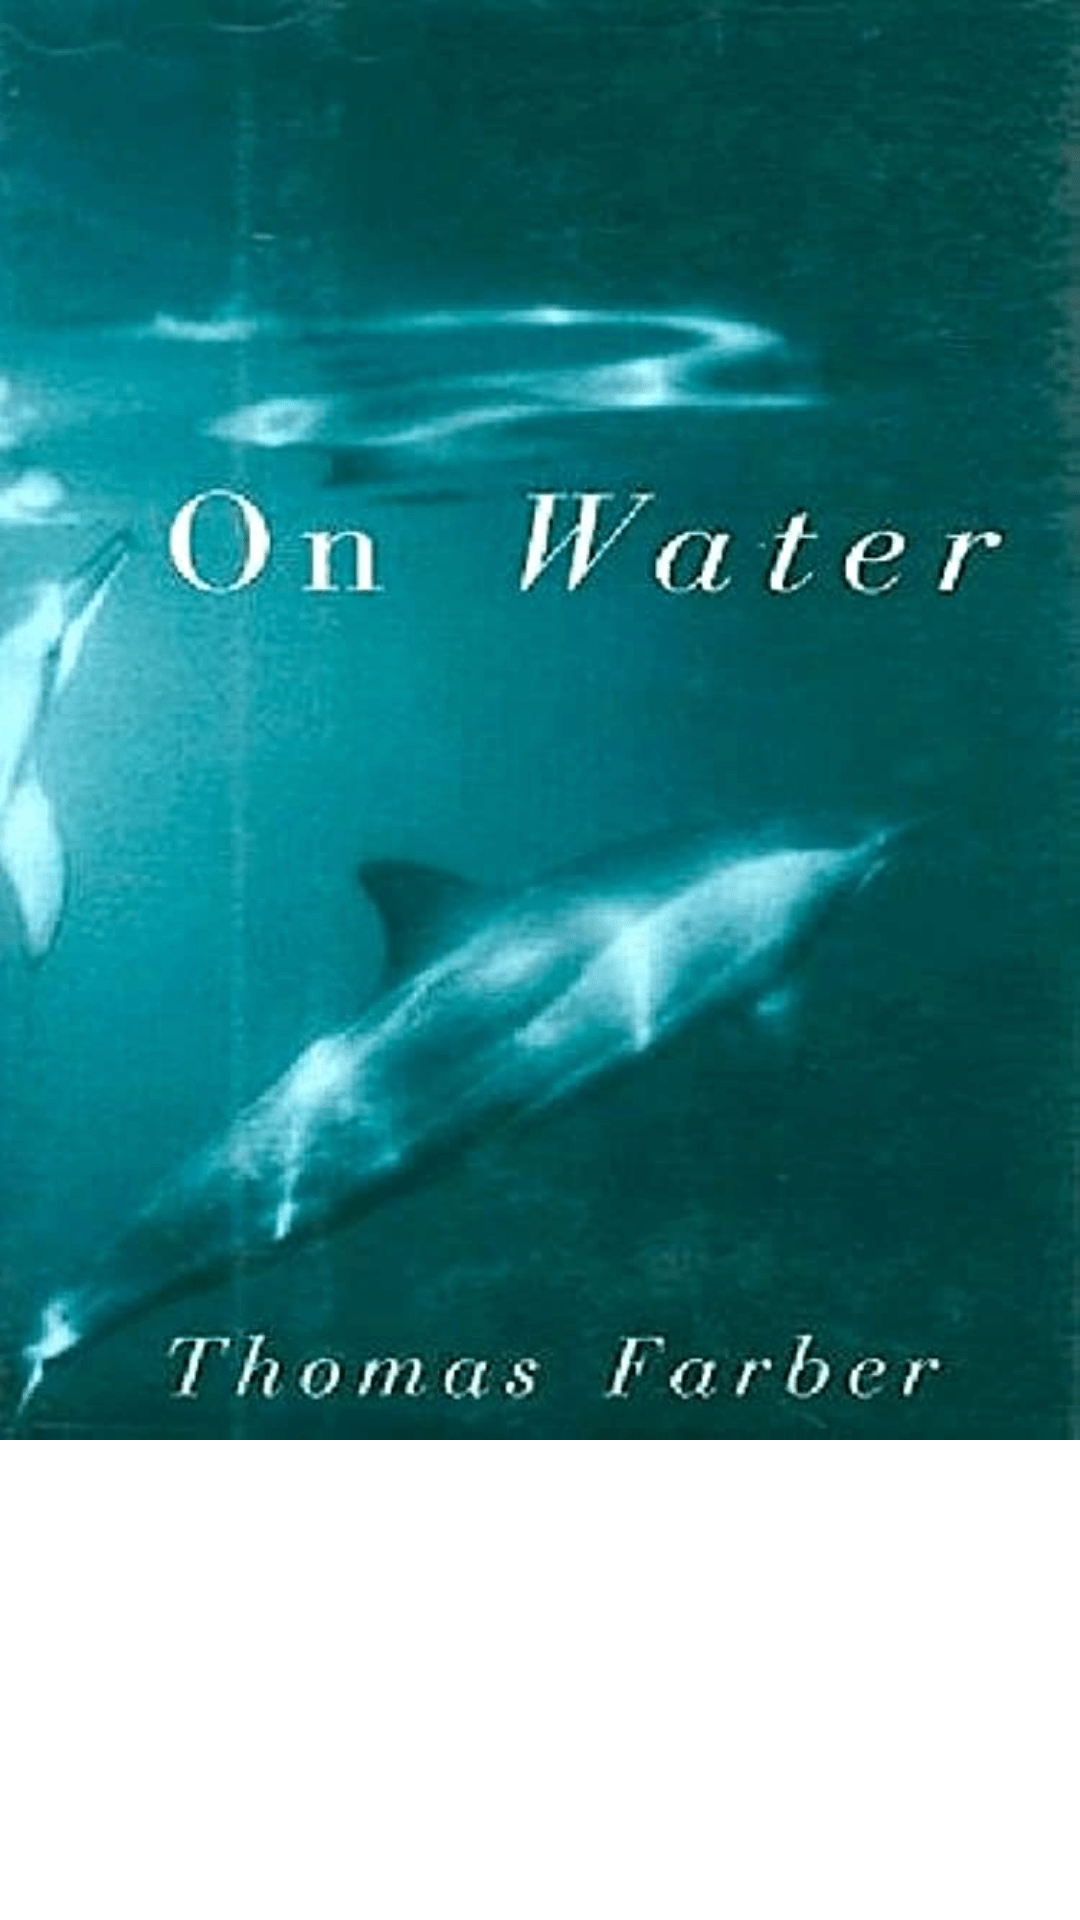 On Water by Thomas Farber